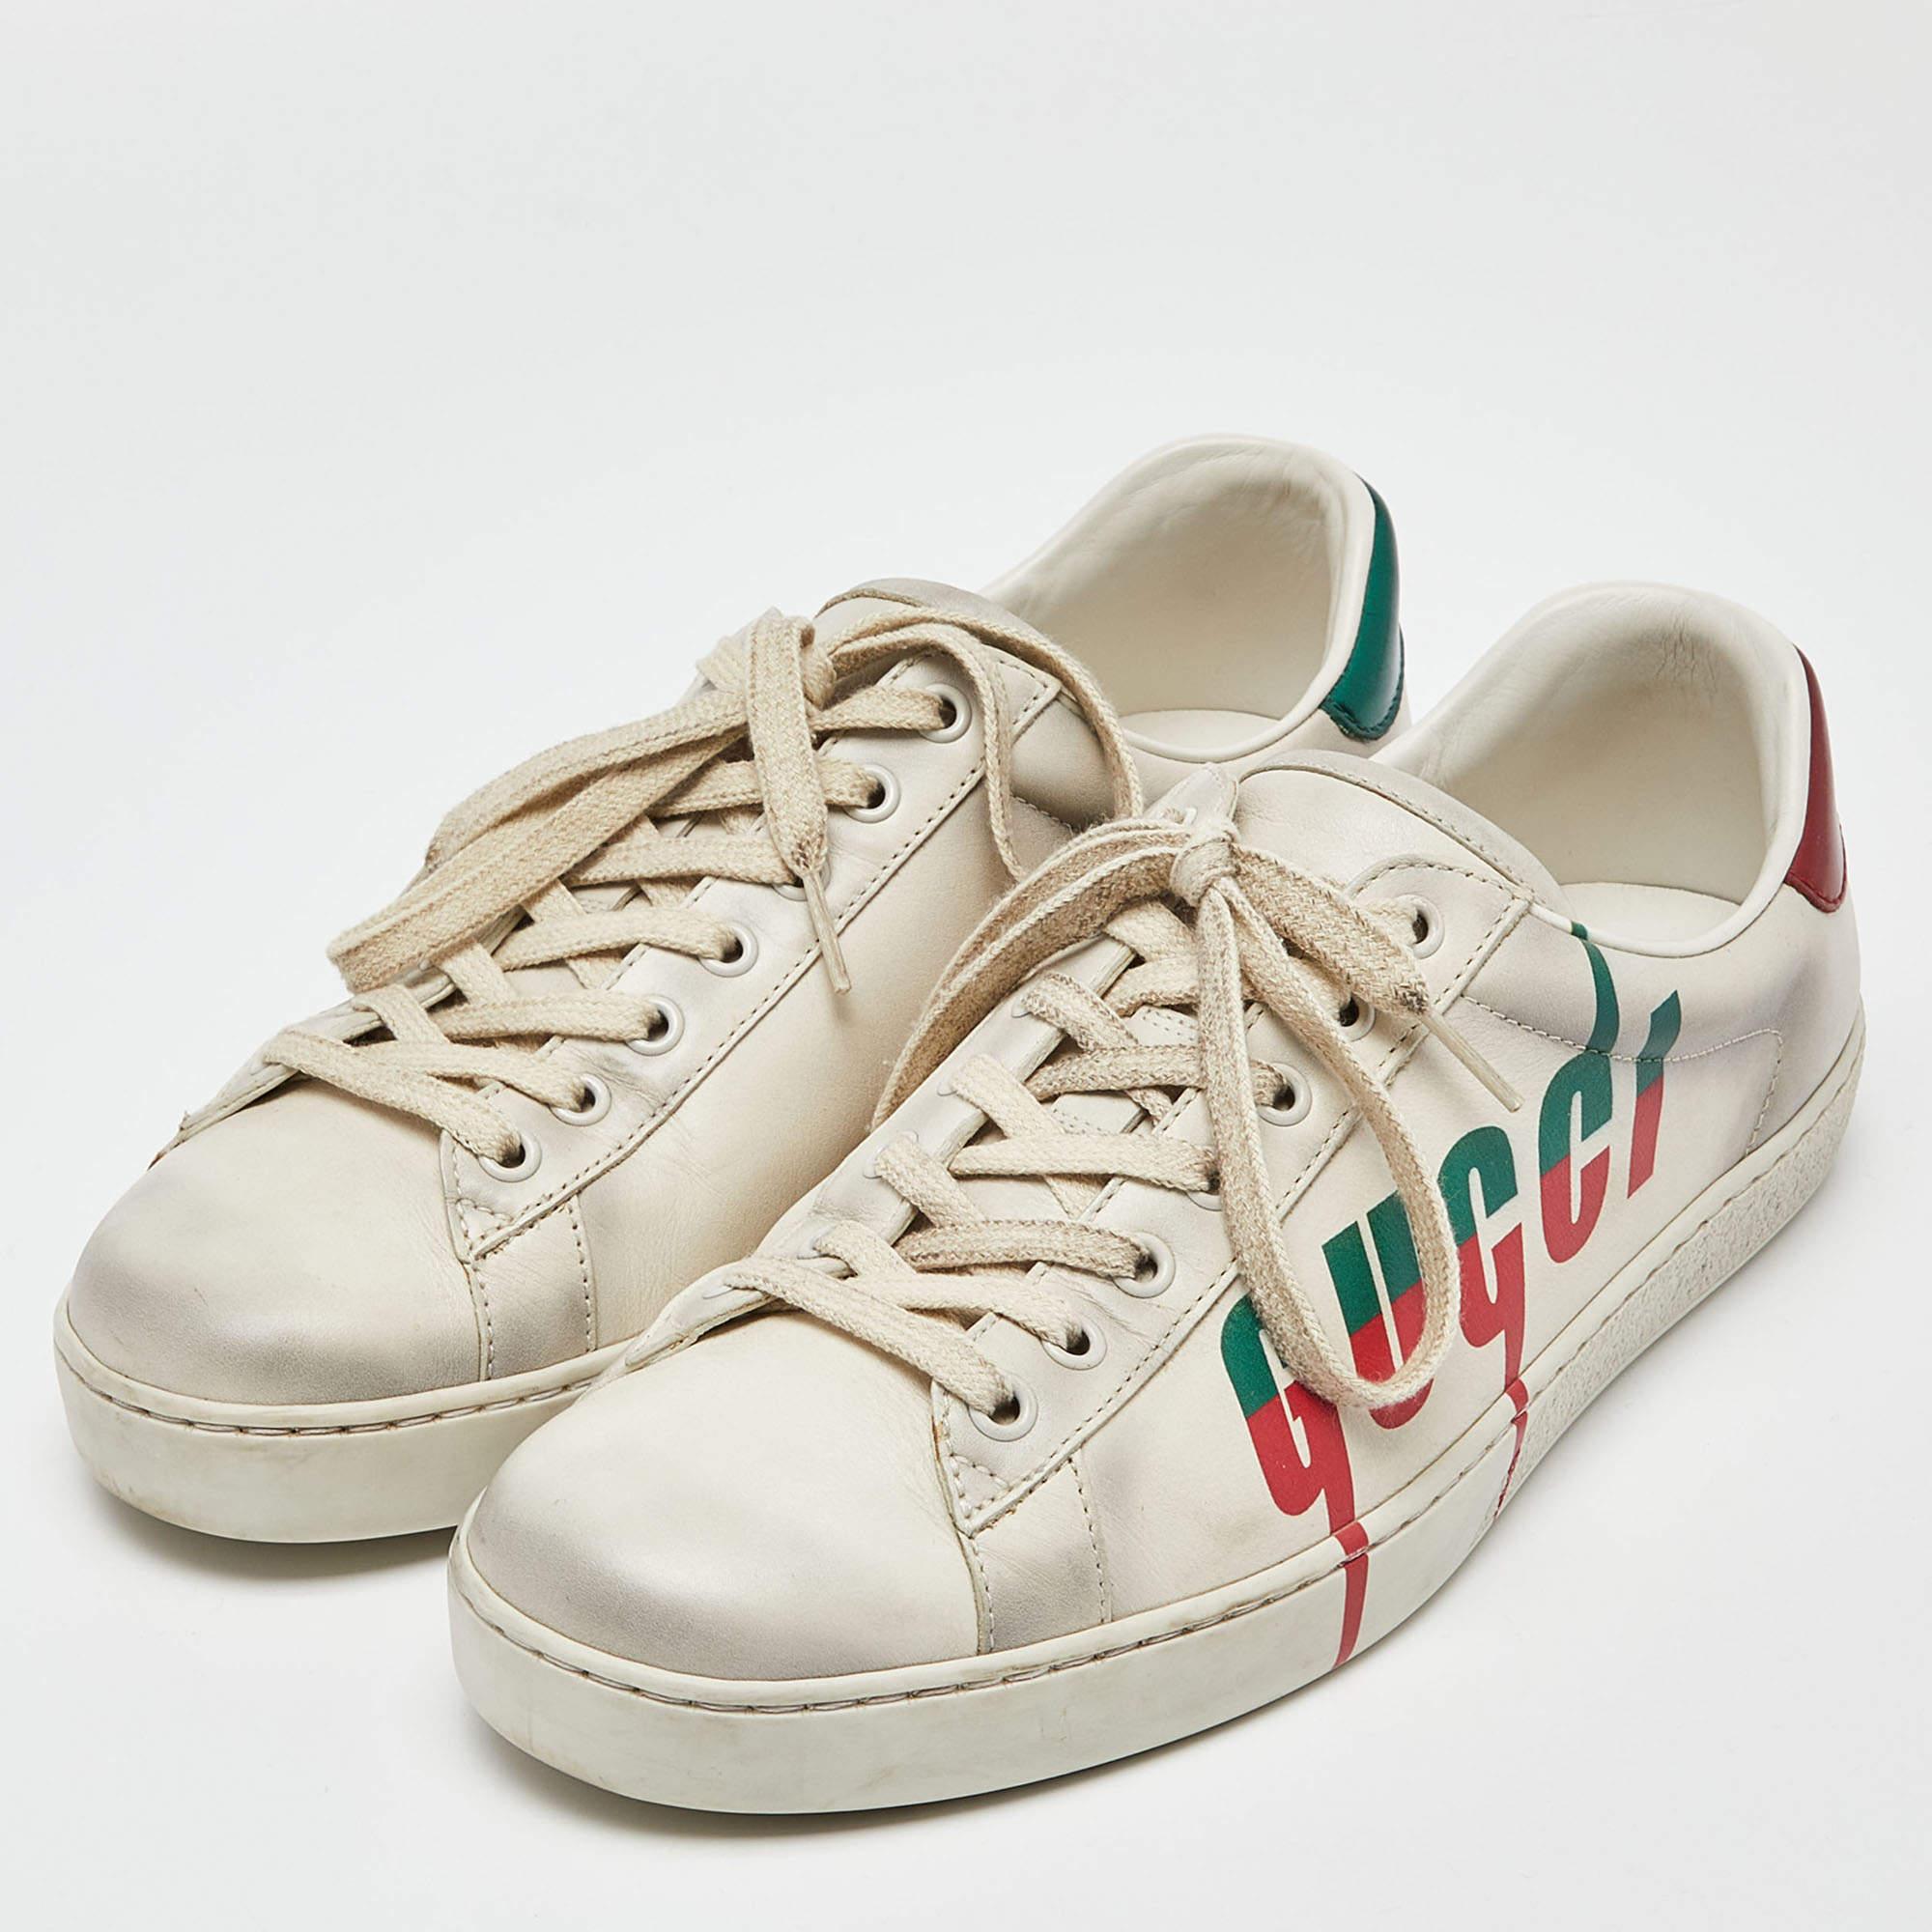 Designed to elevate your style quotient and give you comfort at the same time, these Gucci white sneakers are crafted using the best materials. Pair them with your casuals for a cool look.

